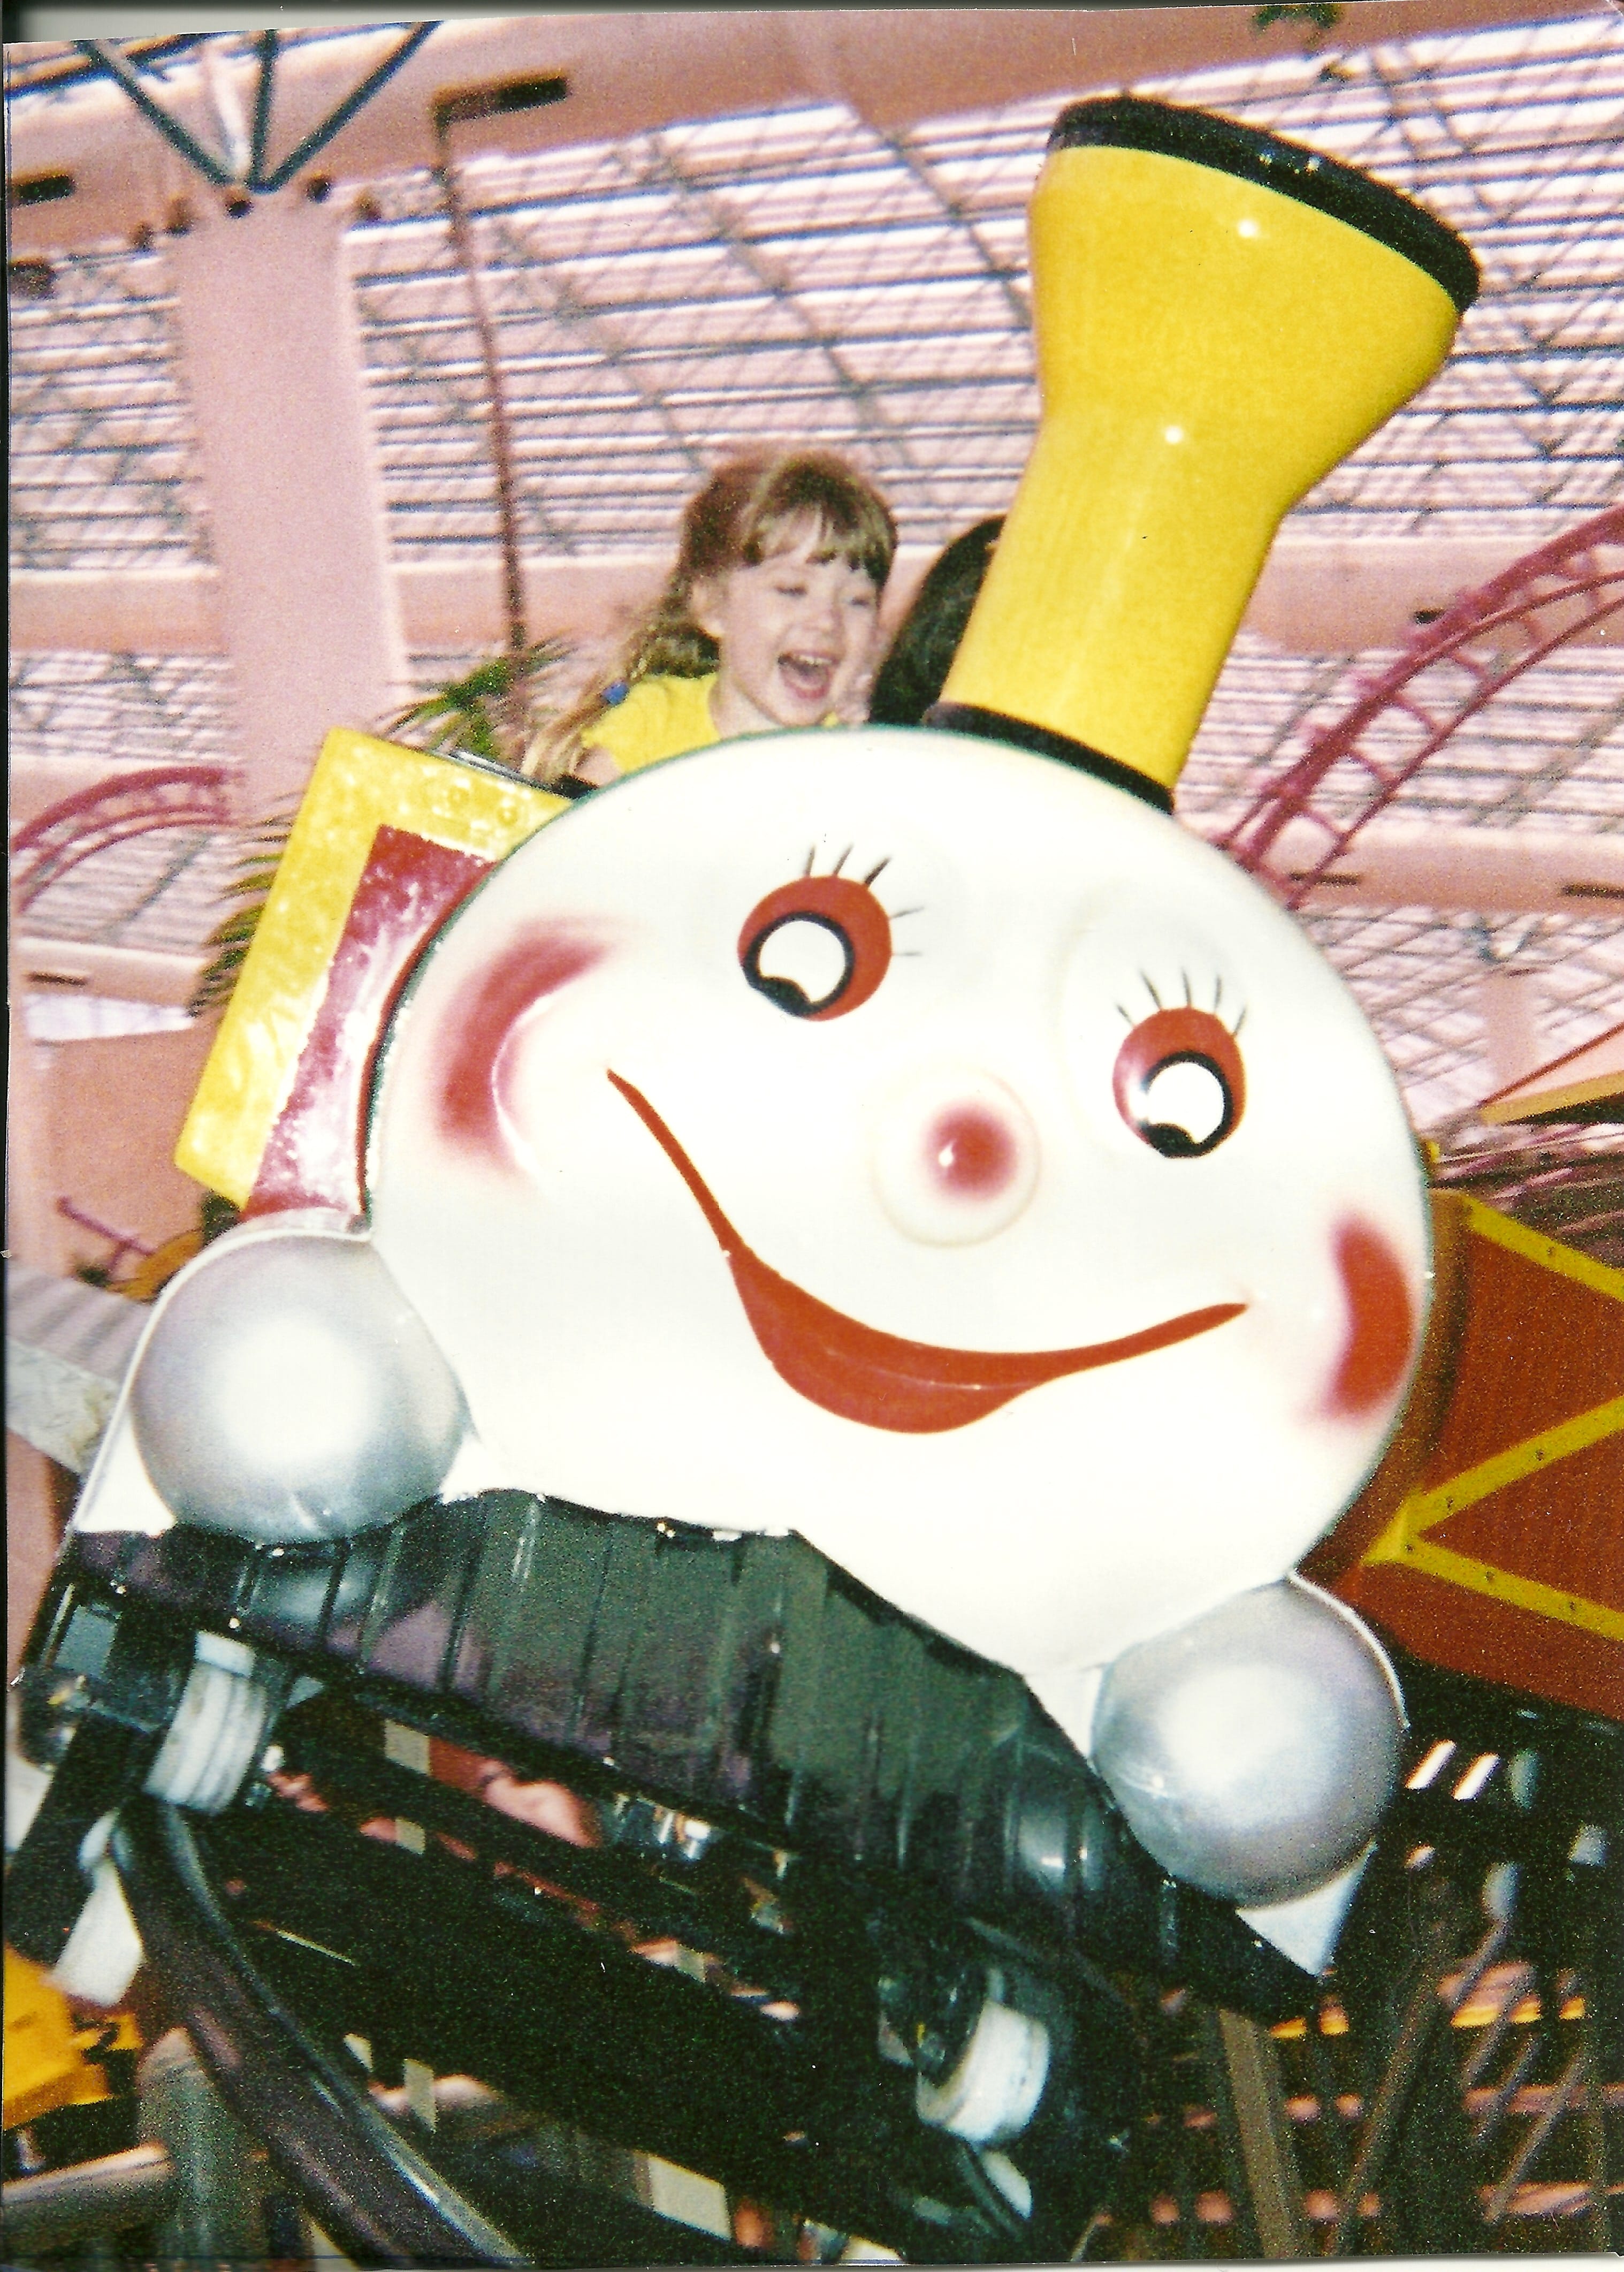 Pure Joy on the face of my granddaughter Sophie riding the roller coaster at Circus Circus in Las Vegas; in 2002 when she was 4 years old. Picture taken by Victoria Moy (grandmother).